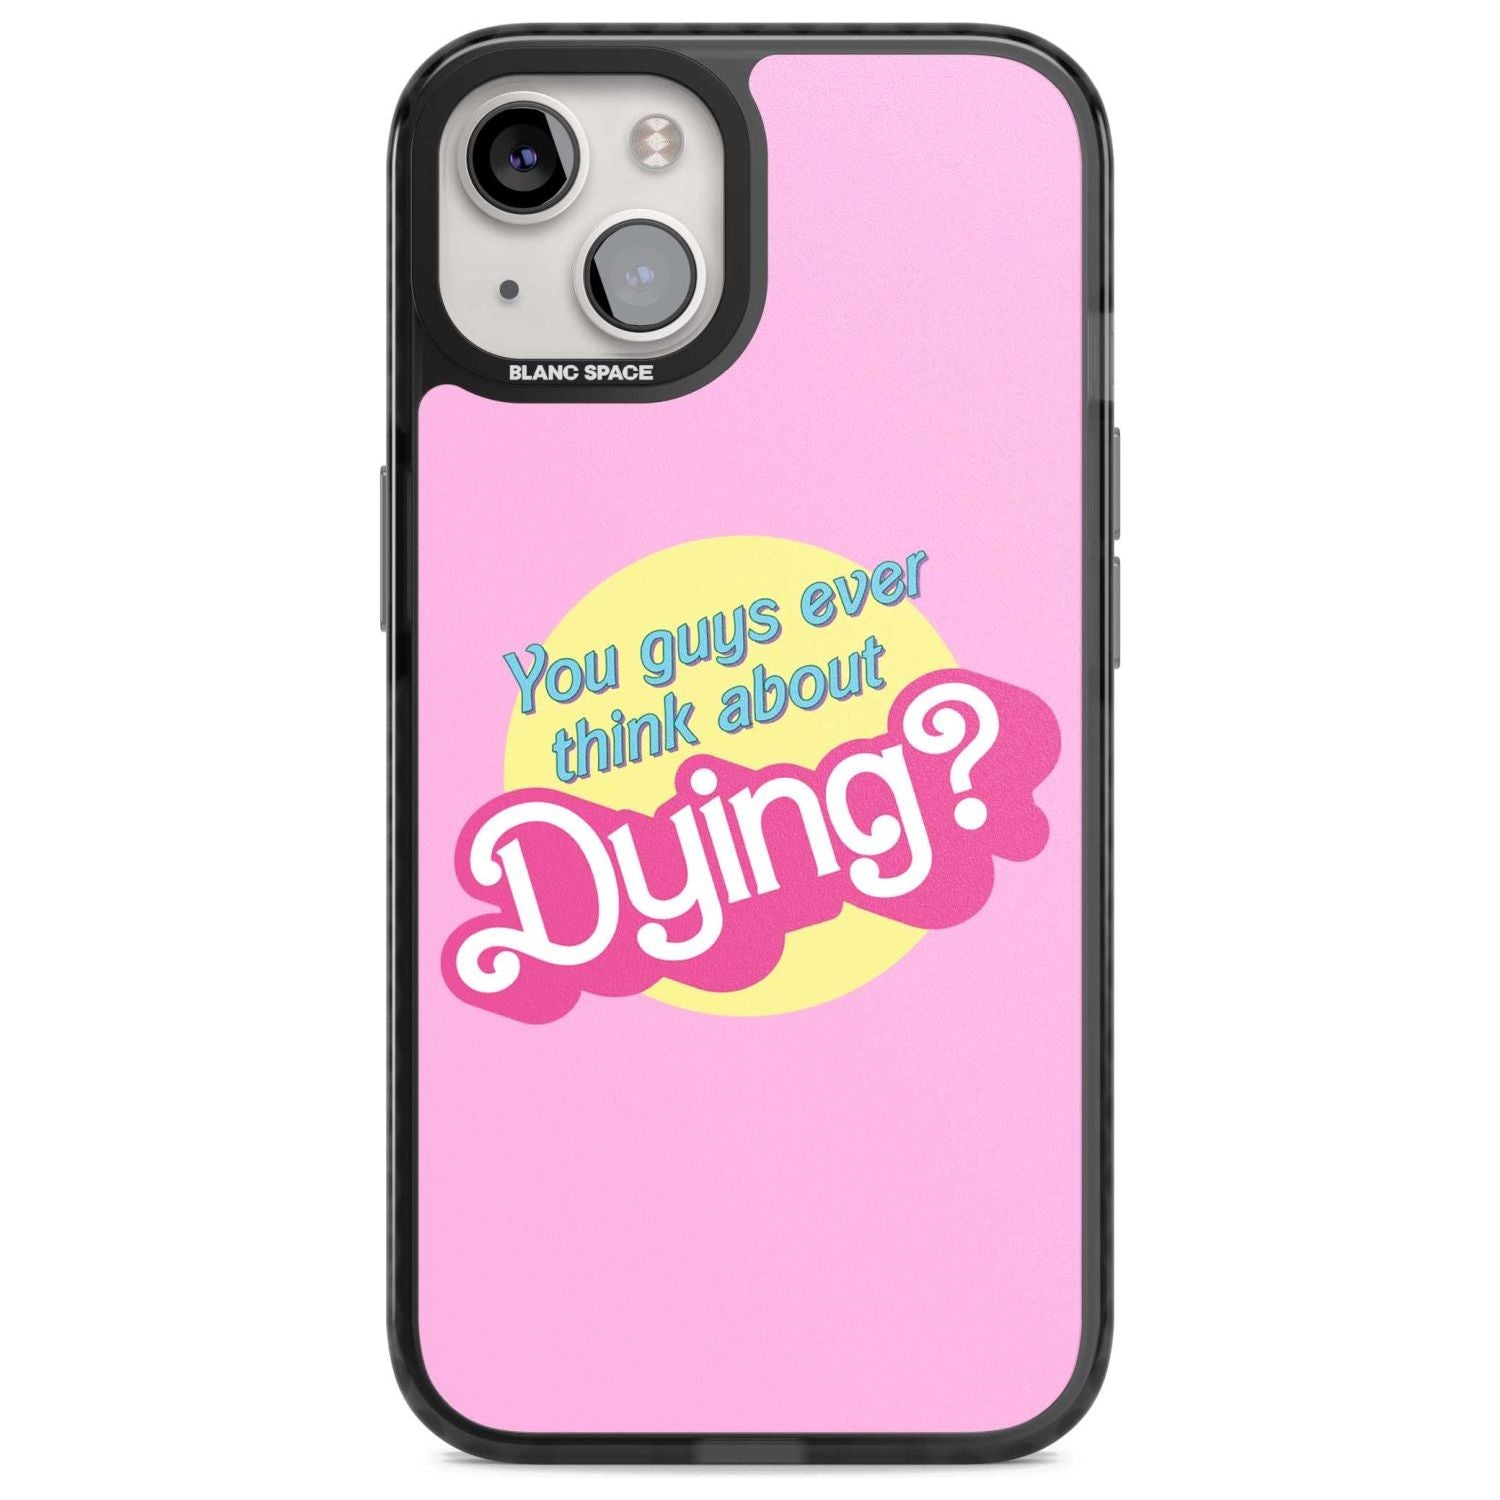 Ever Think About Dying? Phone Case iPhone 15 Plus / Magsafe Black Impact Case,iPhone 15 / Magsafe Black Impact Case,iPhone 14 Plus / Magsafe Black Impact Case,iPhone 14 / Magsafe Black Impact Case,iPhone 13 / Magsafe Black Impact Case Blanc Space